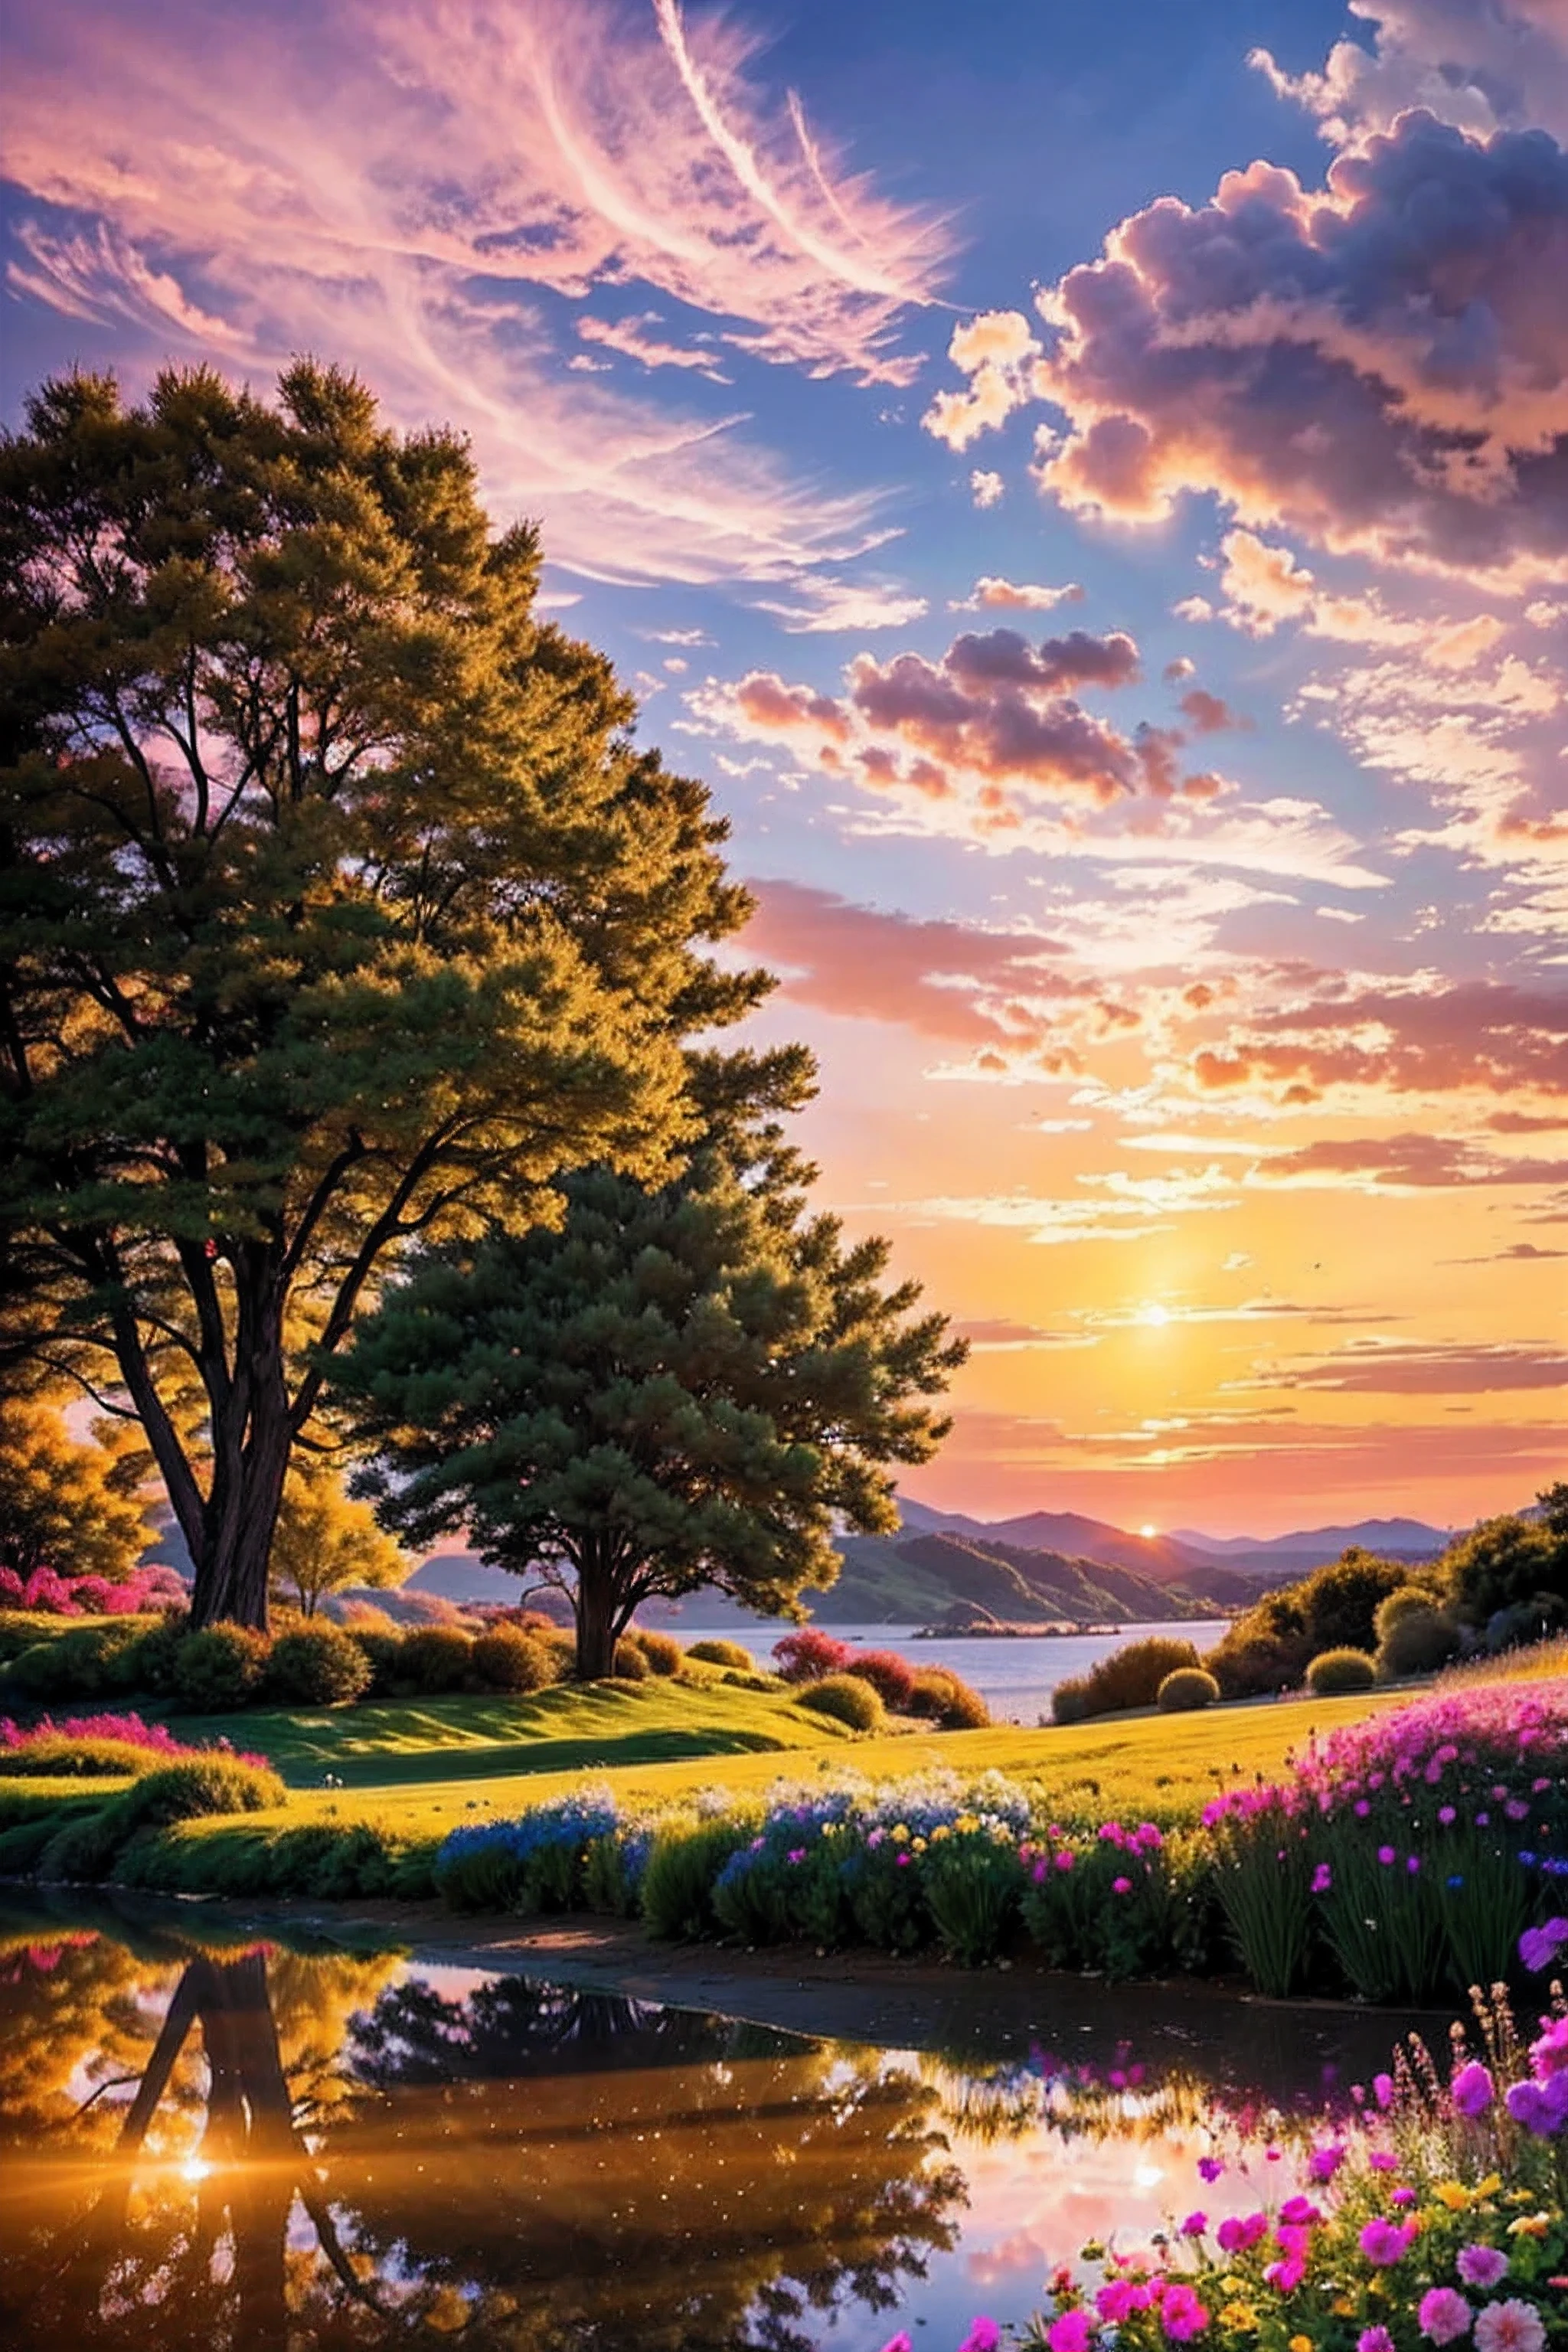 There is a beautiful sunset, the hillside is covered with flowers and plants, the flowers are up close, the colorful sky, the surreal colors, the colorful sunsets, the colorful sky, the marvelous sky reflection, the amazing sky, the fantastic atmosphere 8K, the colorful clouds, the color reflection on the lake, the surreal sky, the red and blue reflection, the fire reflection, the beautiful sky, the beautiful and spectacular dusk, the beautiful dream landscape, the amazing sky